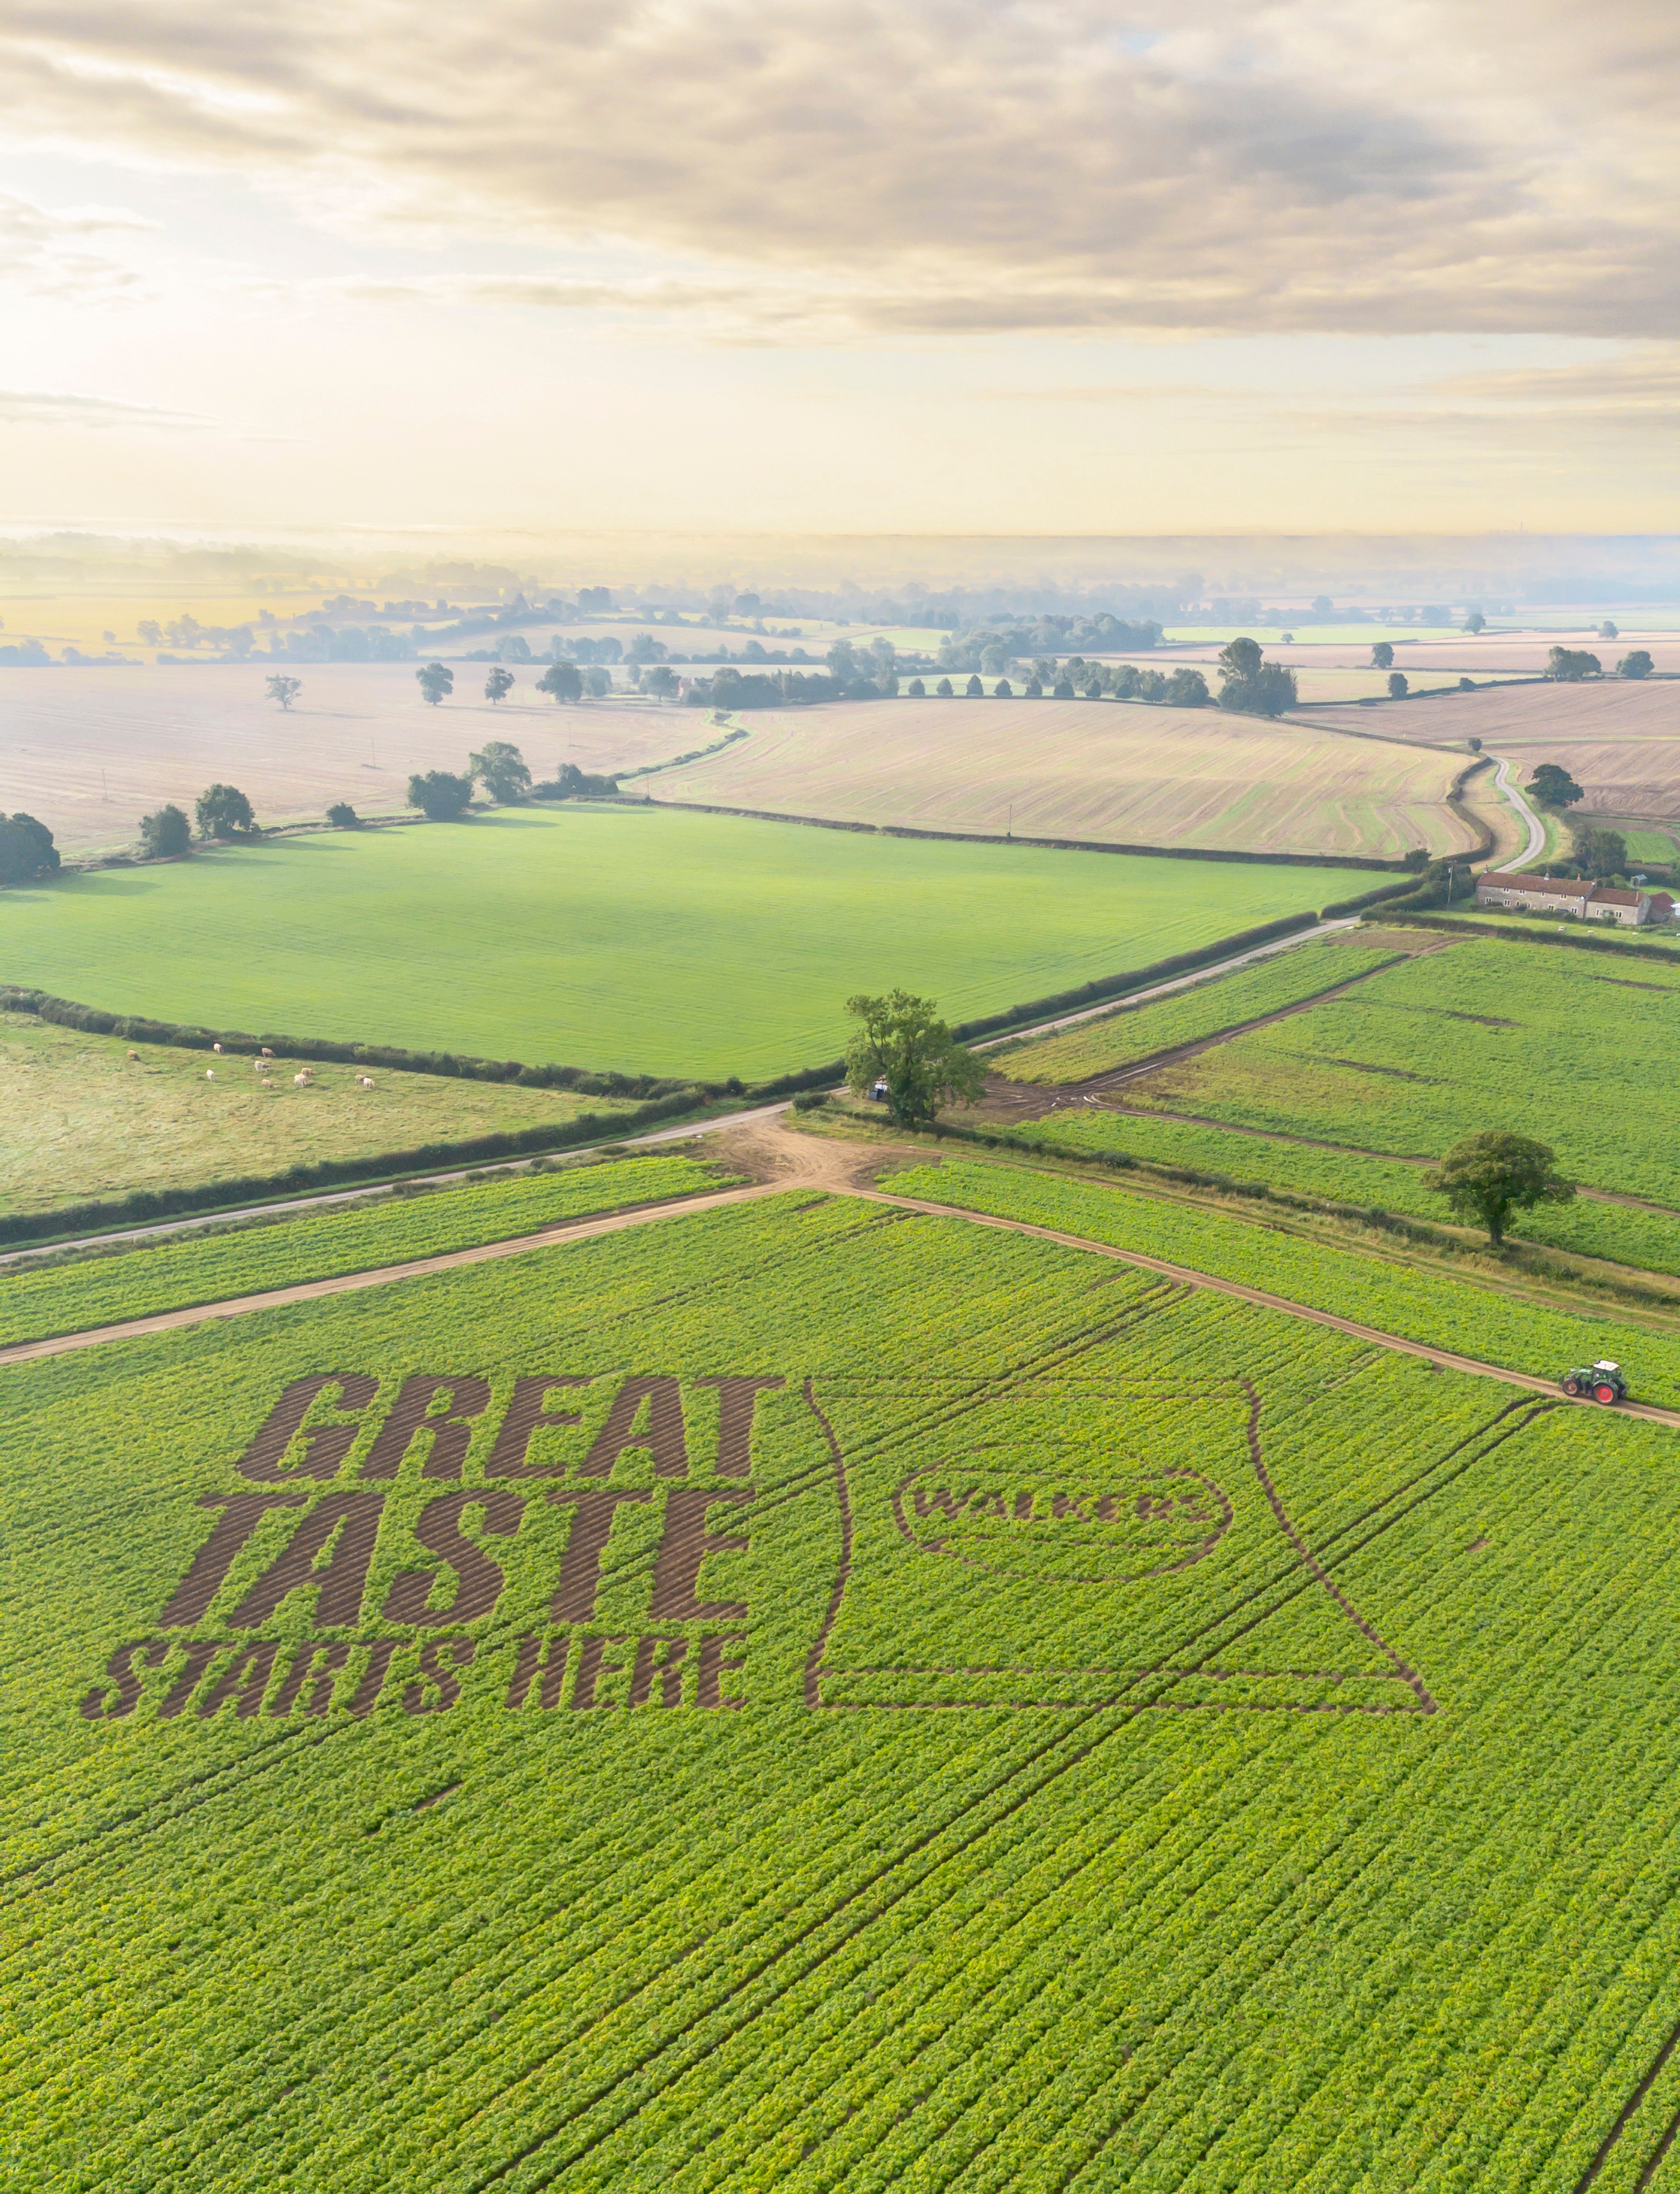 Walkers farmer Tim Rodwell said, “It’s not every day that you get to use potato crops to make a giant message for Britain.”